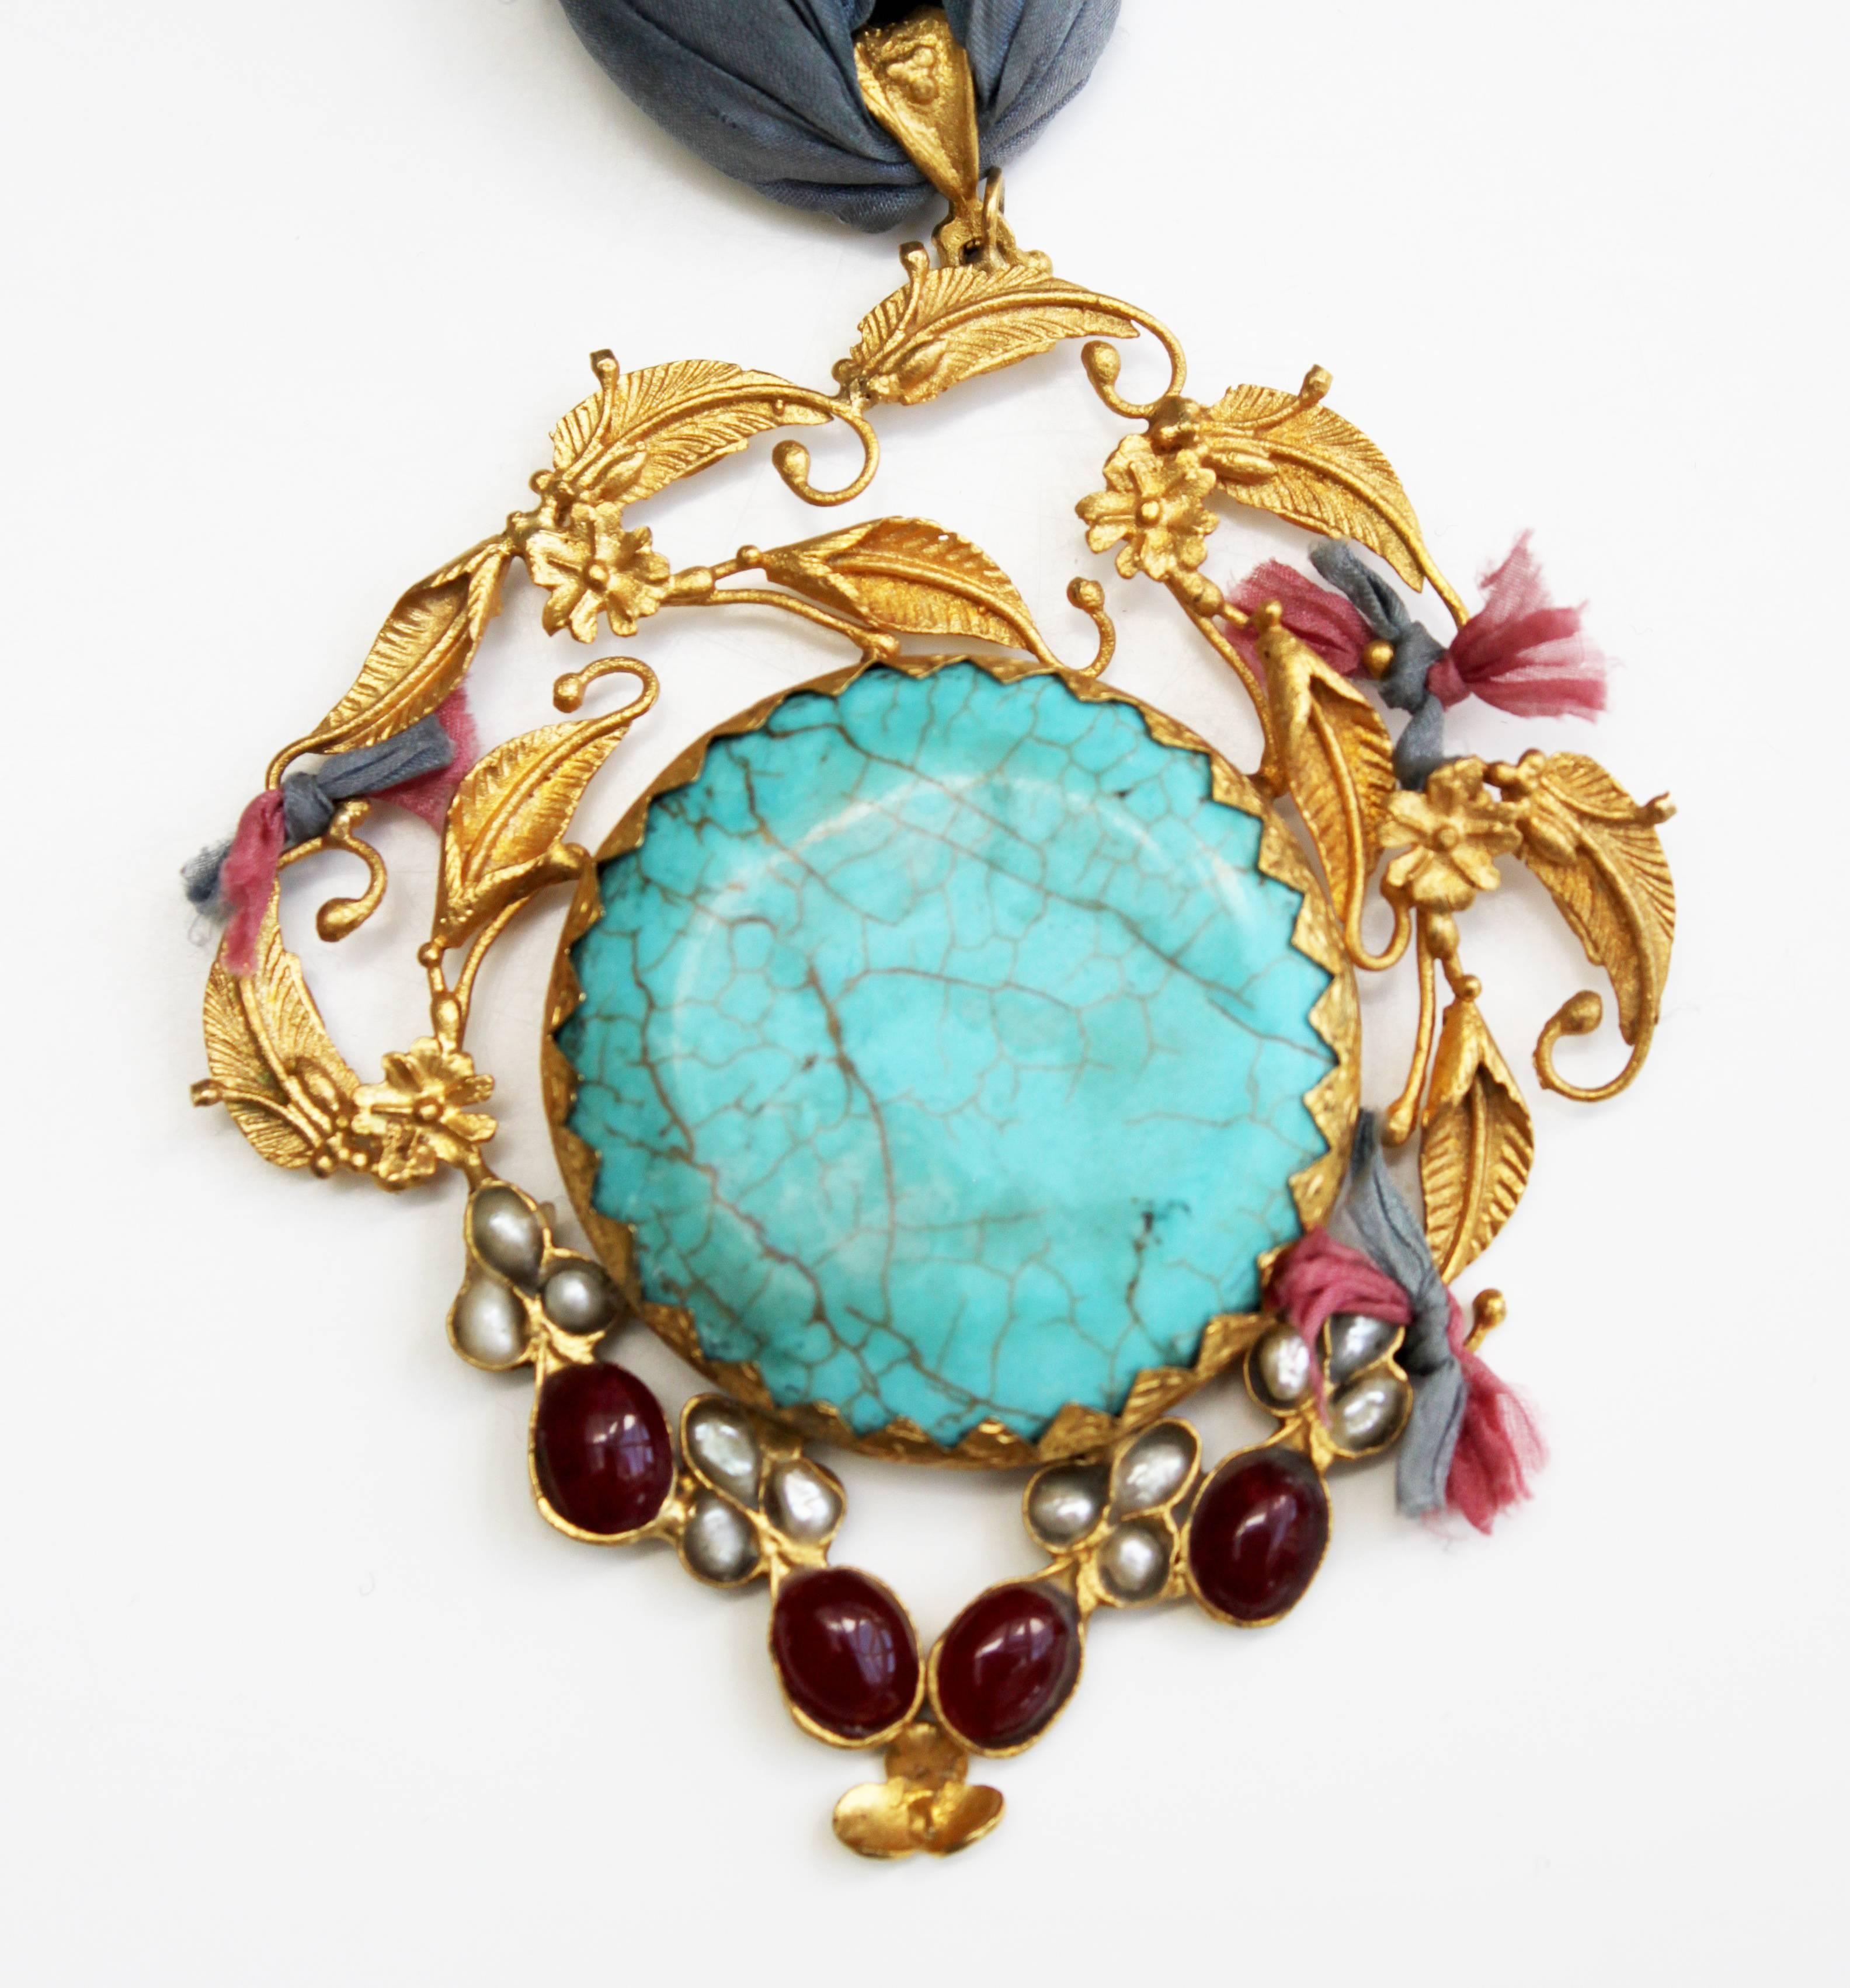 Unique gold-plated pendant with precious stones from Afghanistan. This unique handmade gold-plated pendant was made in Afghanistan, it comes with beautiful mixed precious stones and pearls on long indigo silk necklace. 

The total length of the